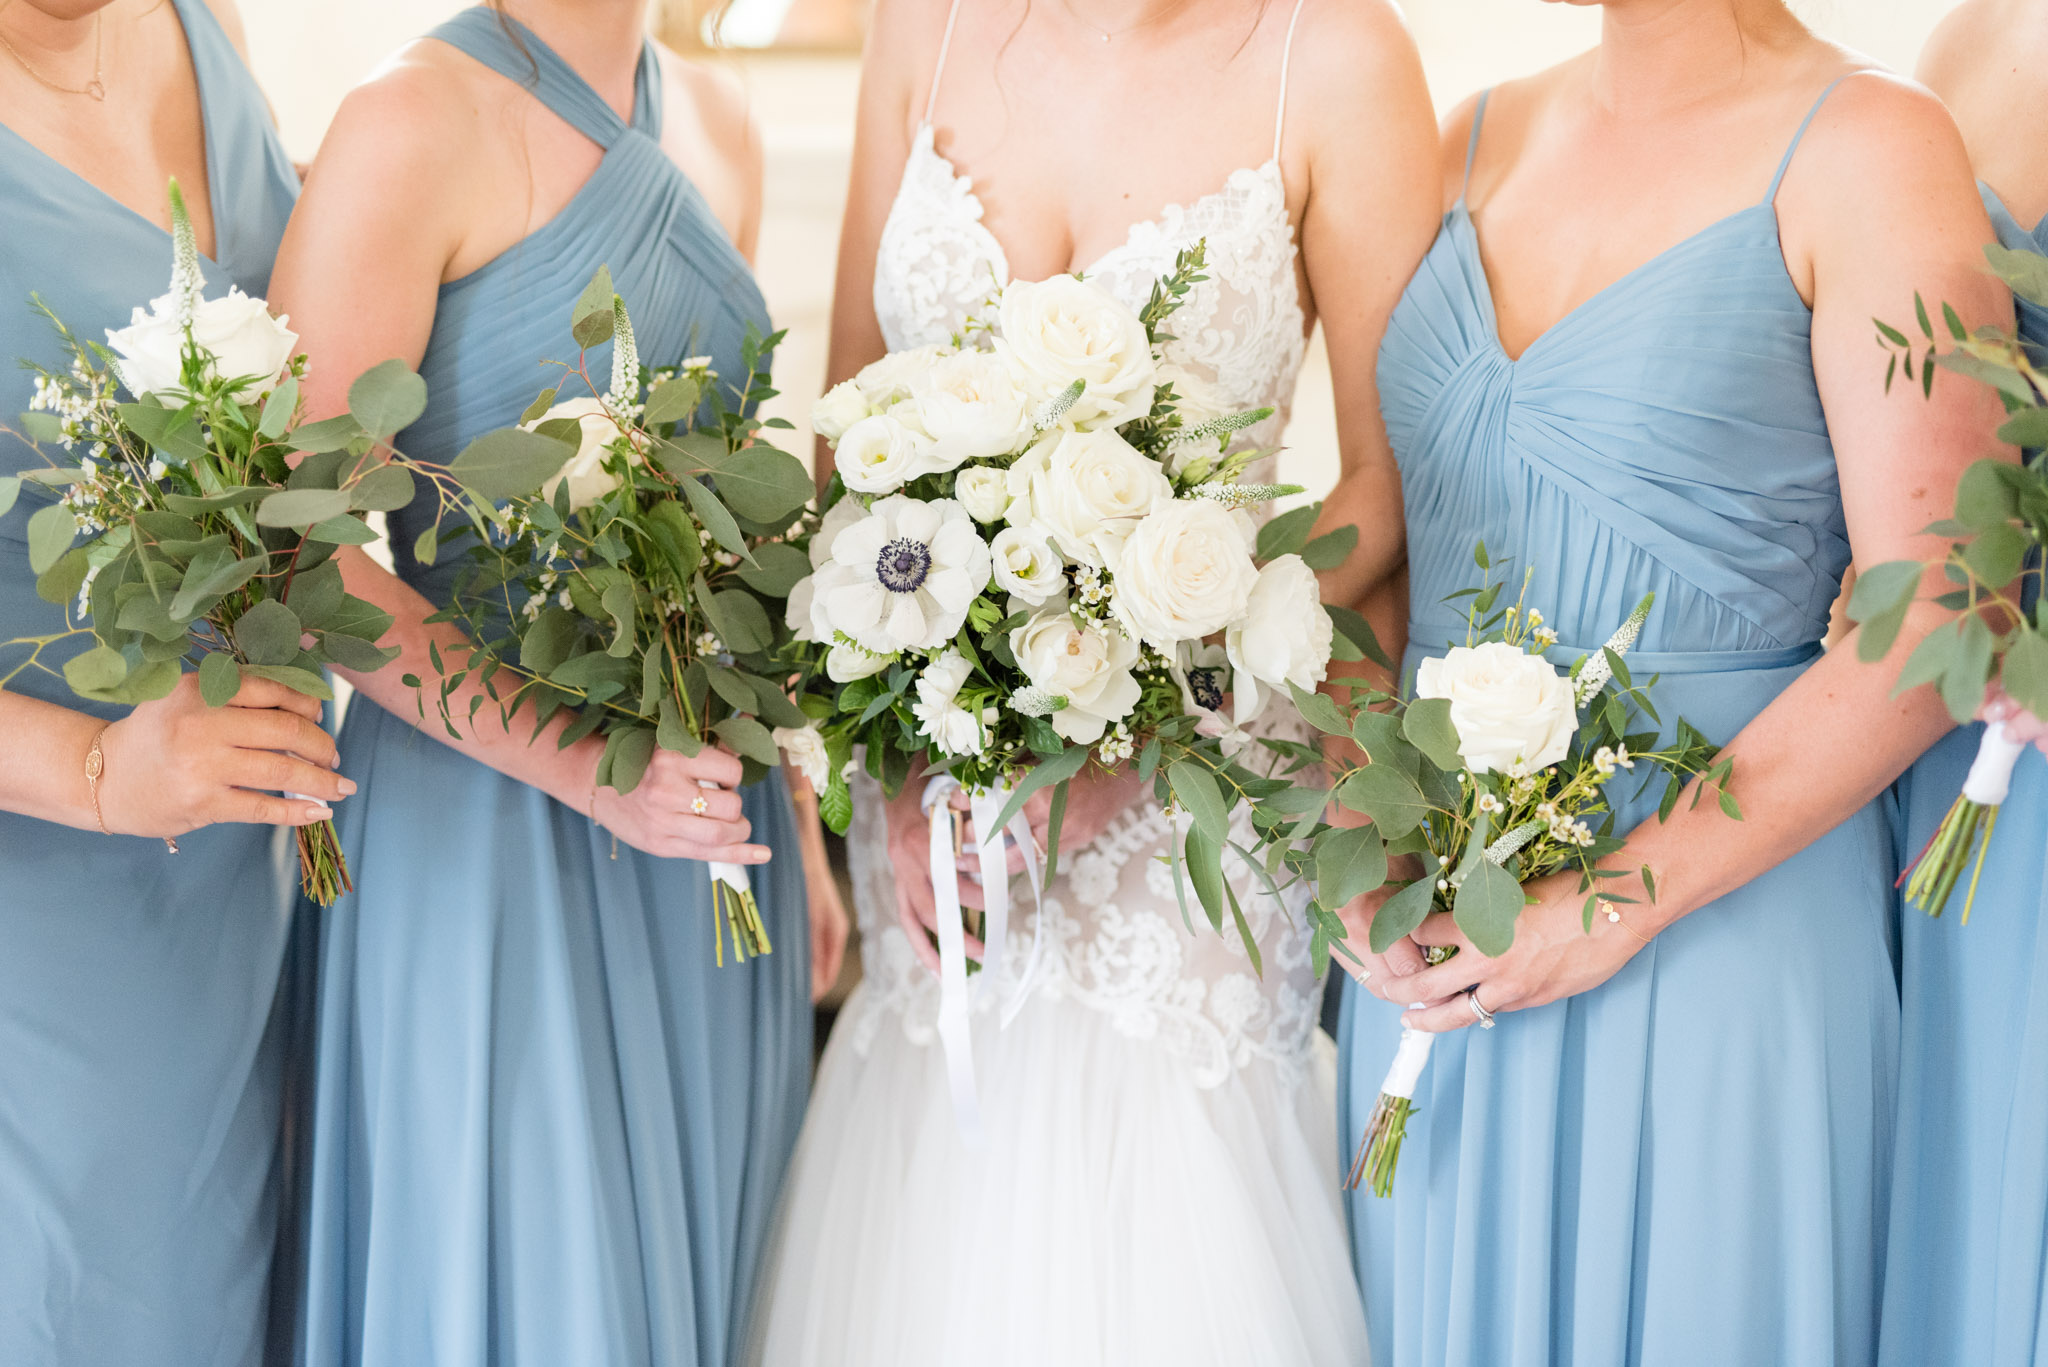 Bride and bridesmaids hold white bouquets.